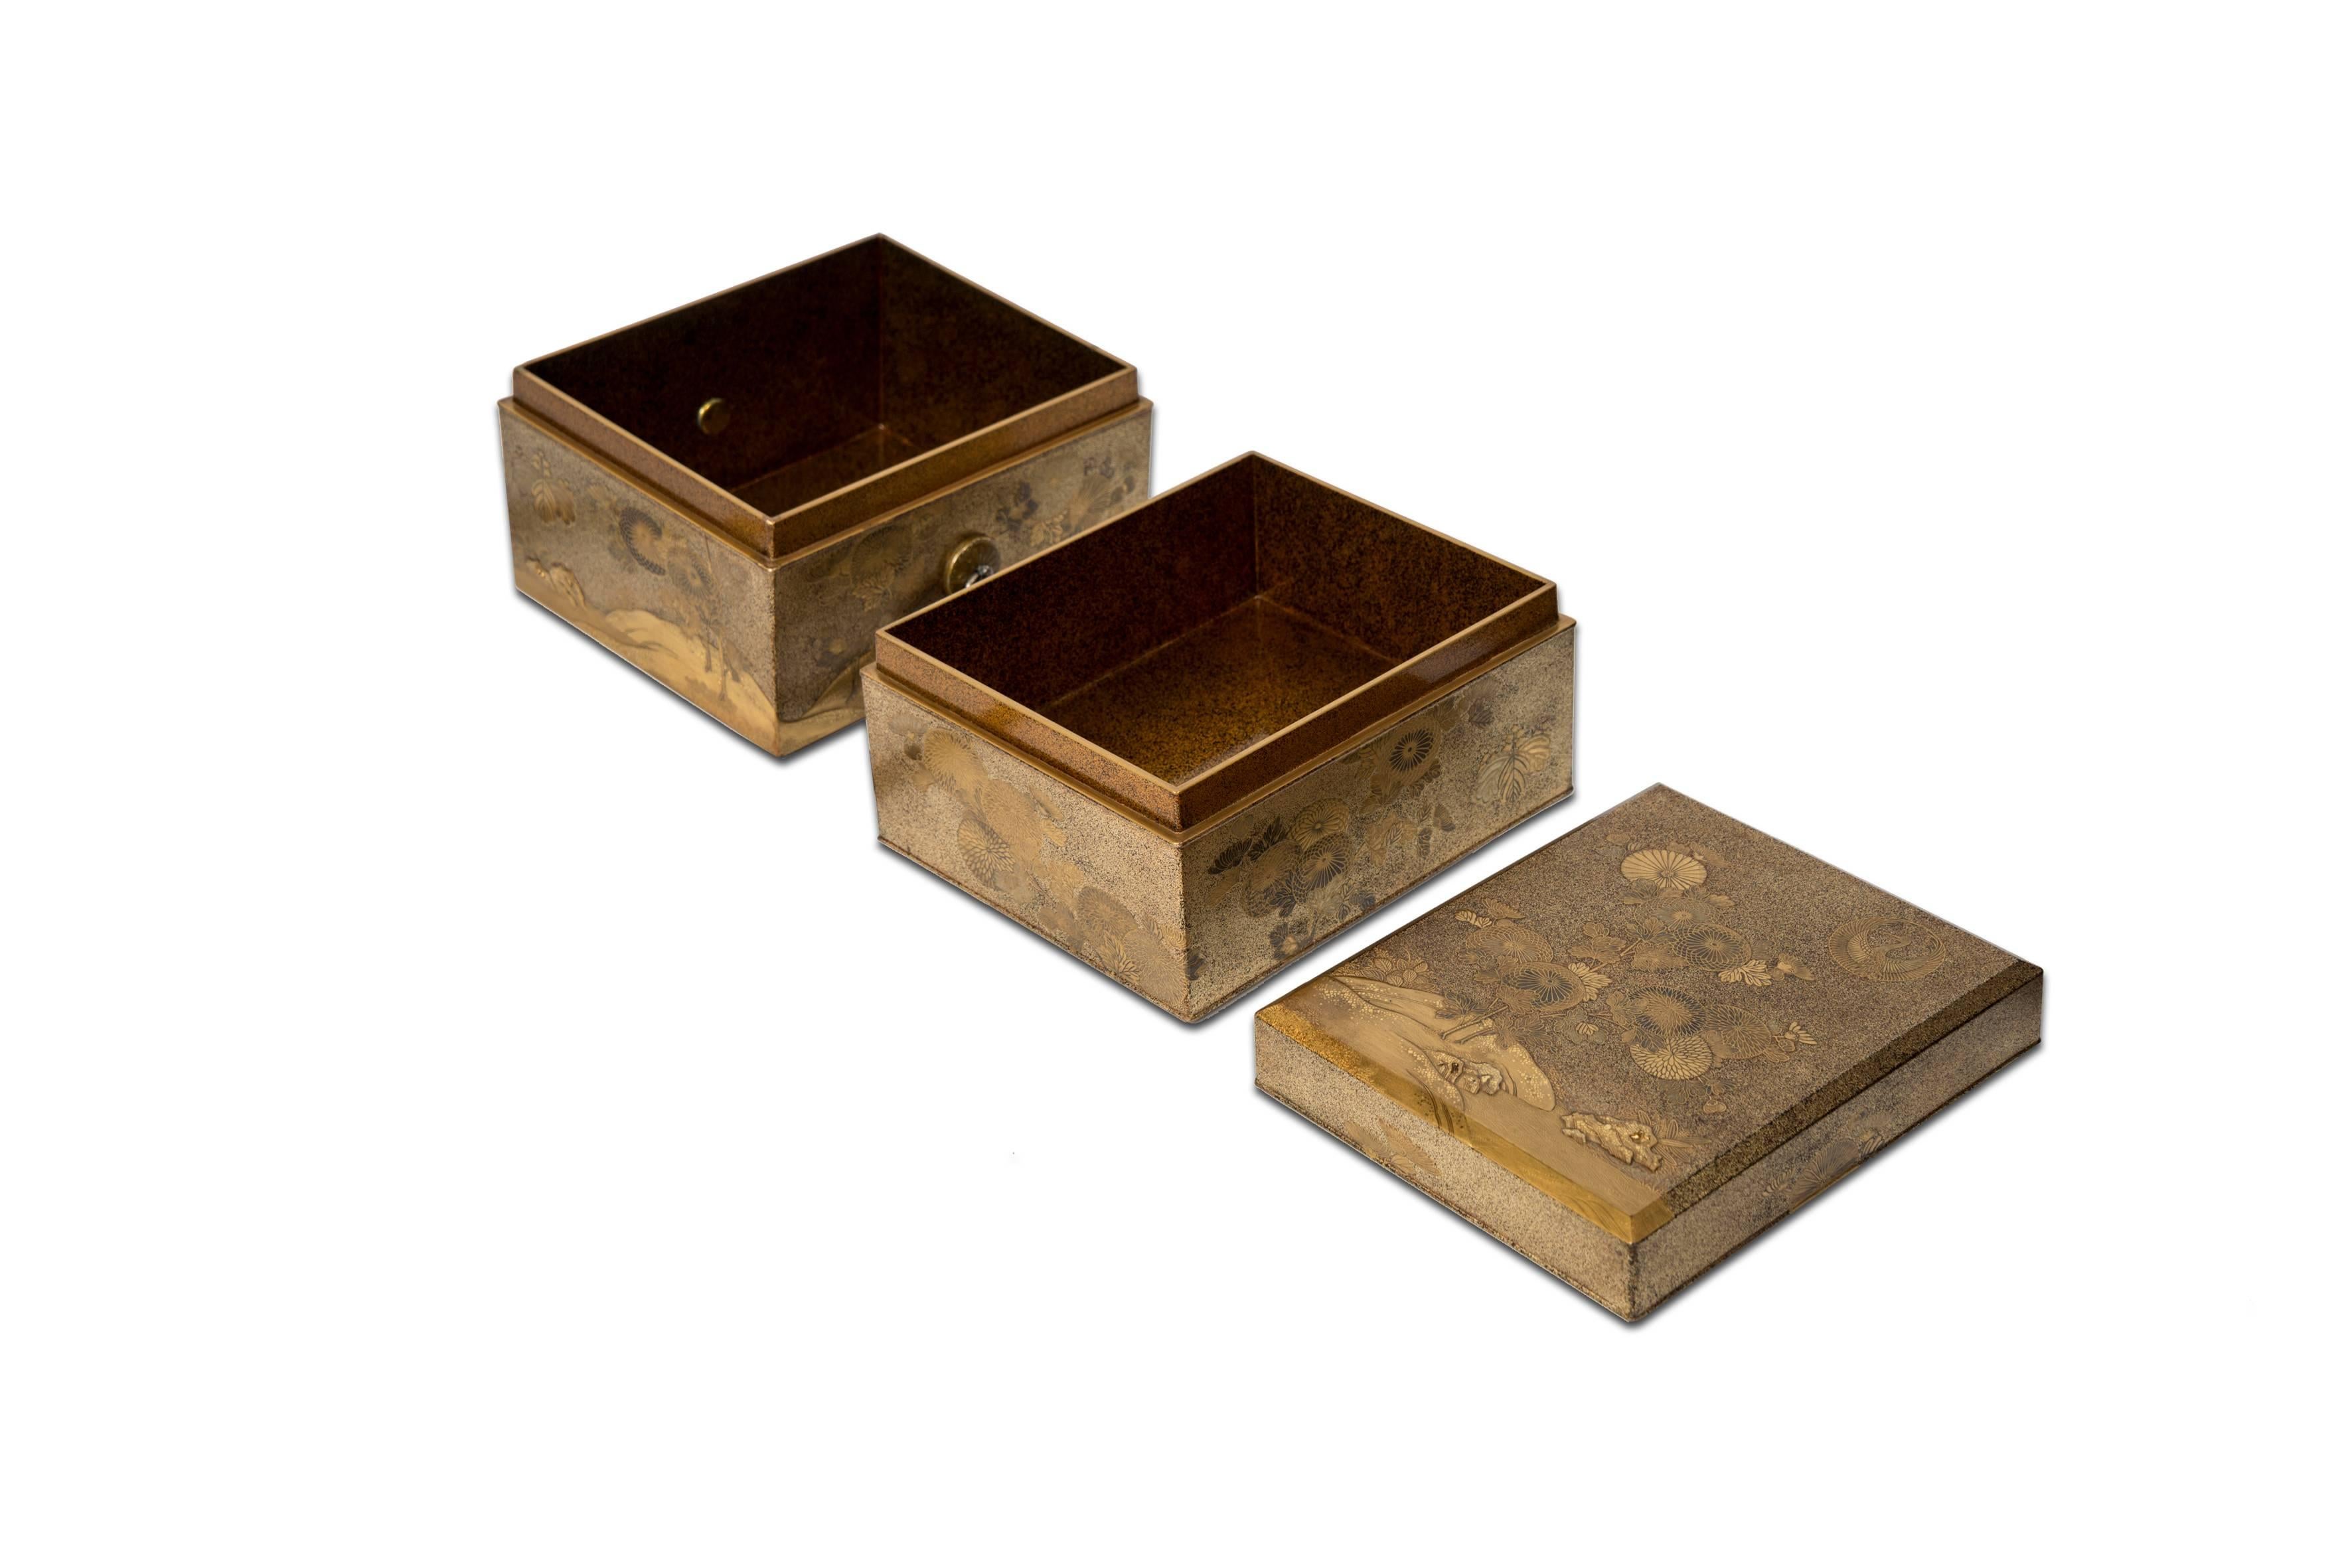 This box is in hirameiji lacquer and consists in three registers, every register corresponding to a compartment and every compartment being of decreasing size. There is a continuity in the decoration between compartments.
The last compartment